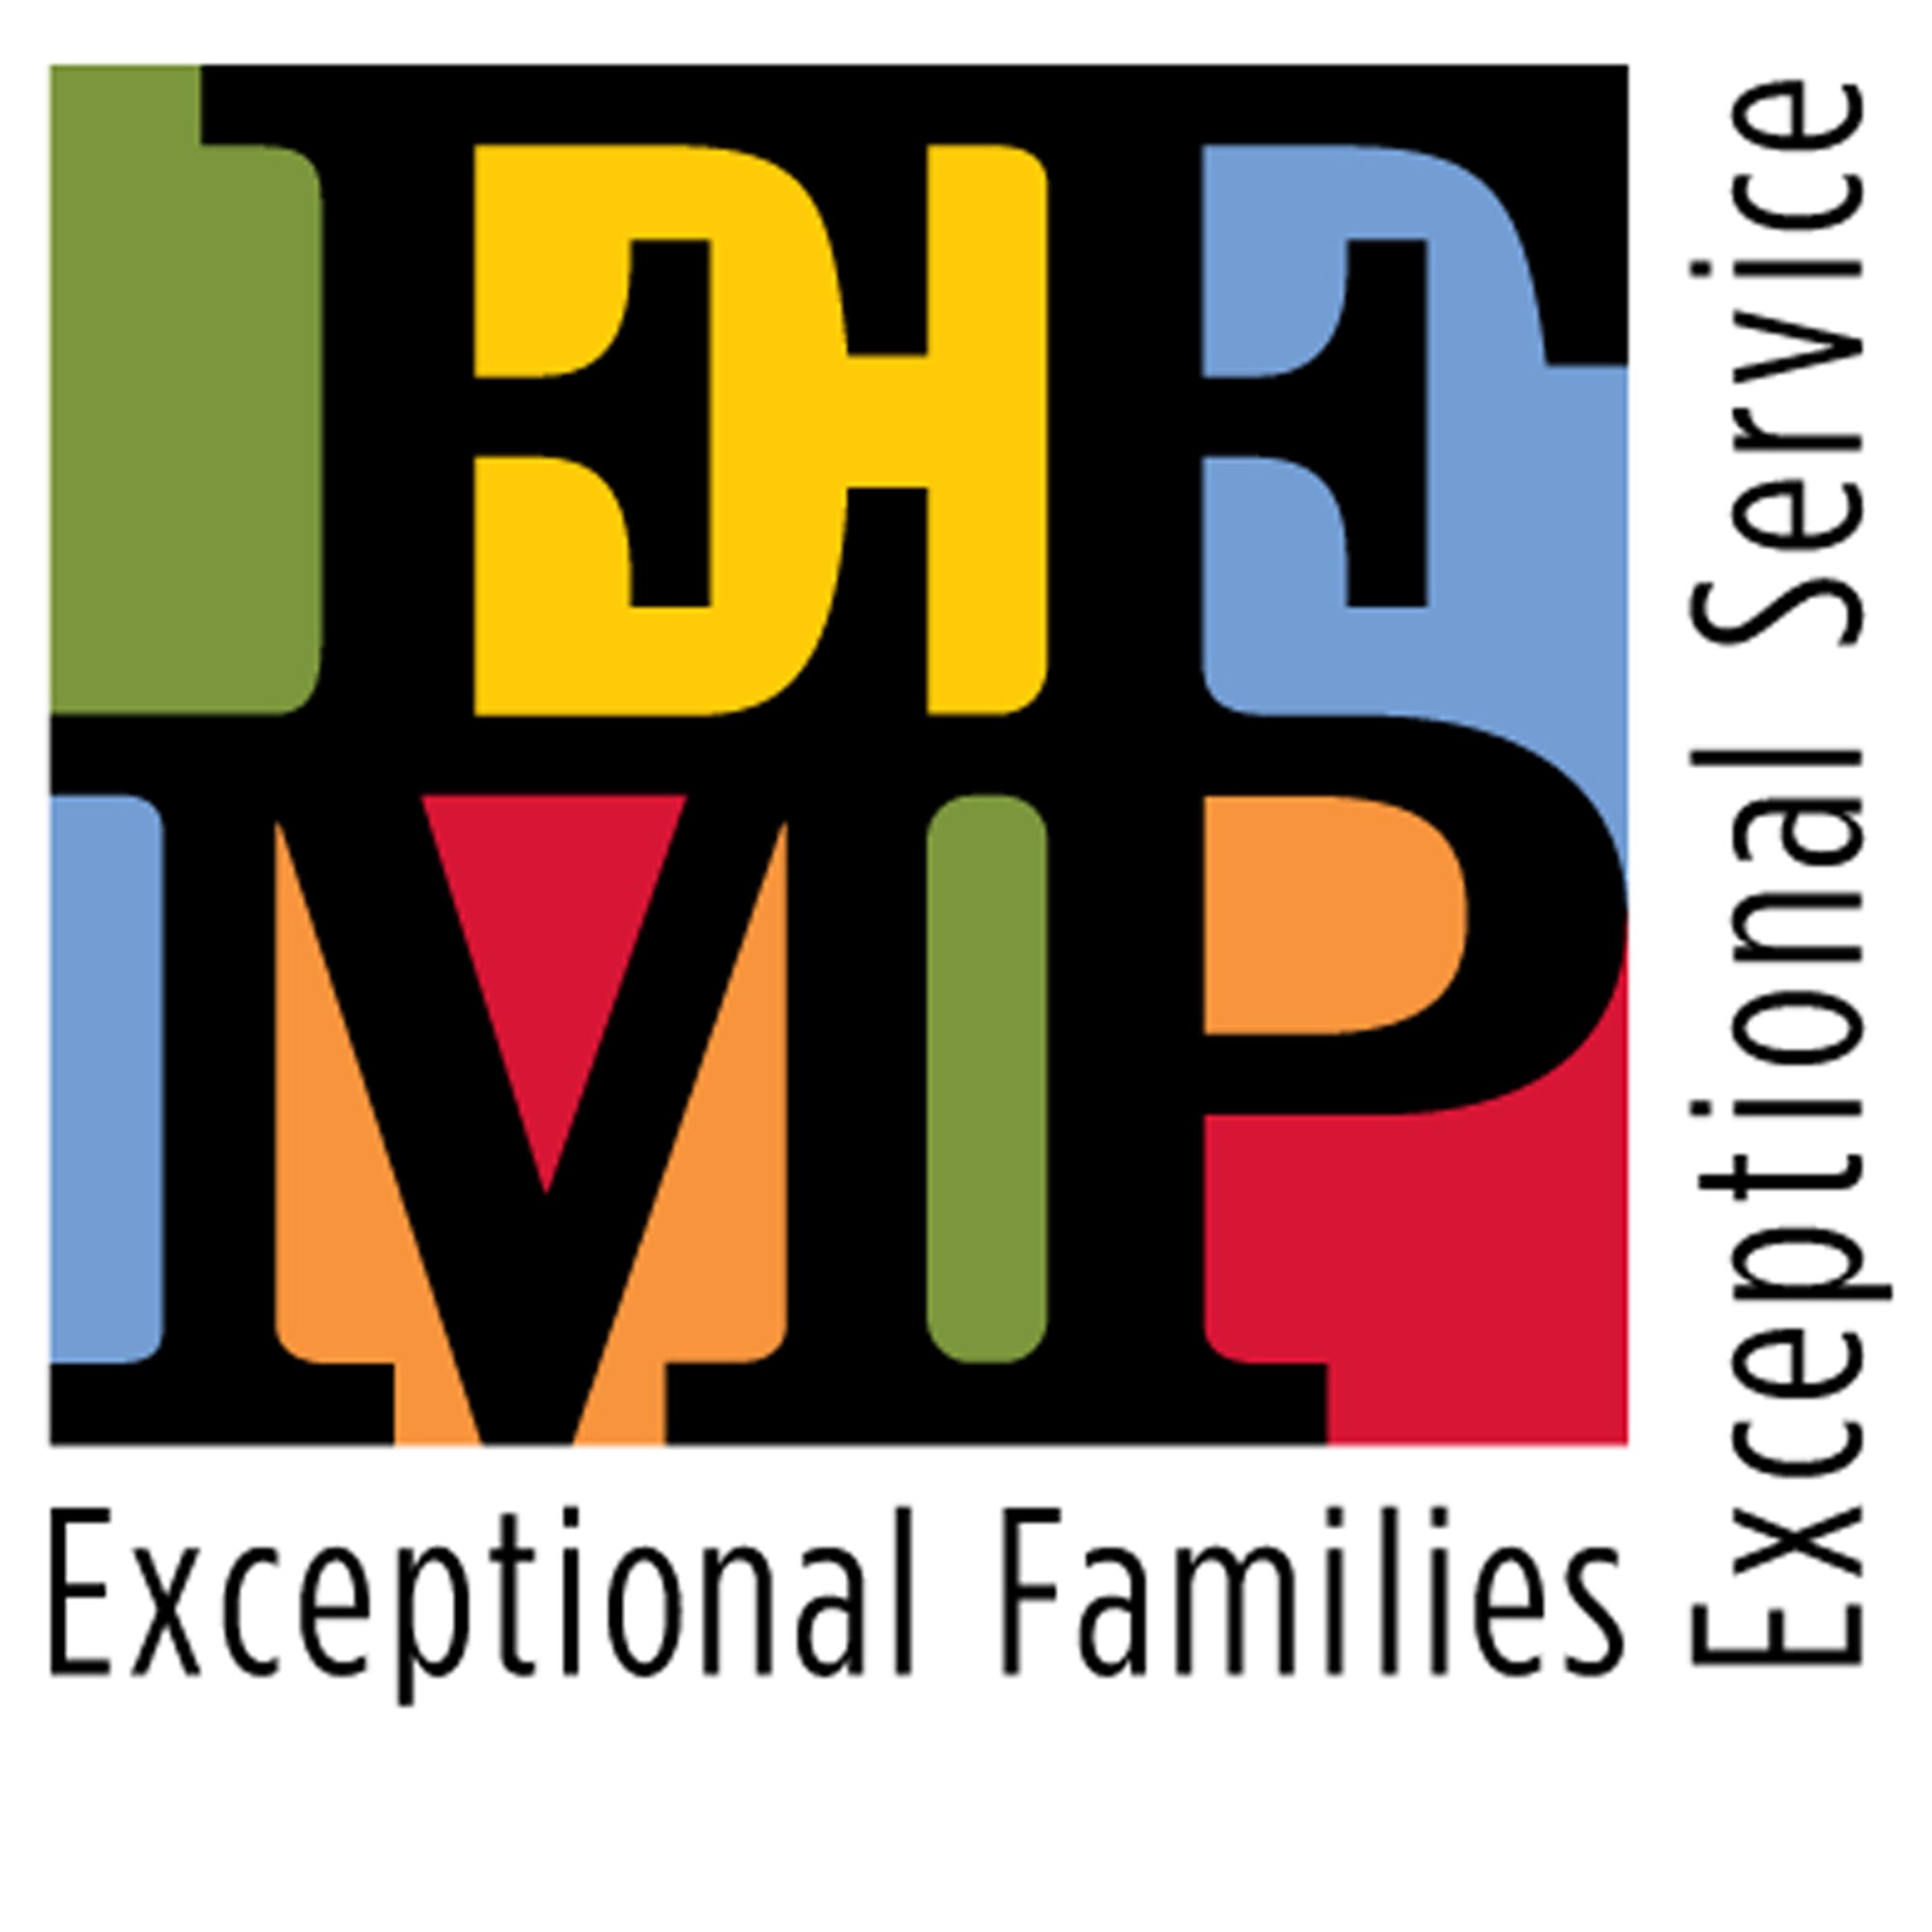 MOODY AIR FORCE BASE, Ga.-- The Exceptional Family Members Program connects active duty family members who have special needs with many helping agencies both on- and off-base. (Contributed graphic)